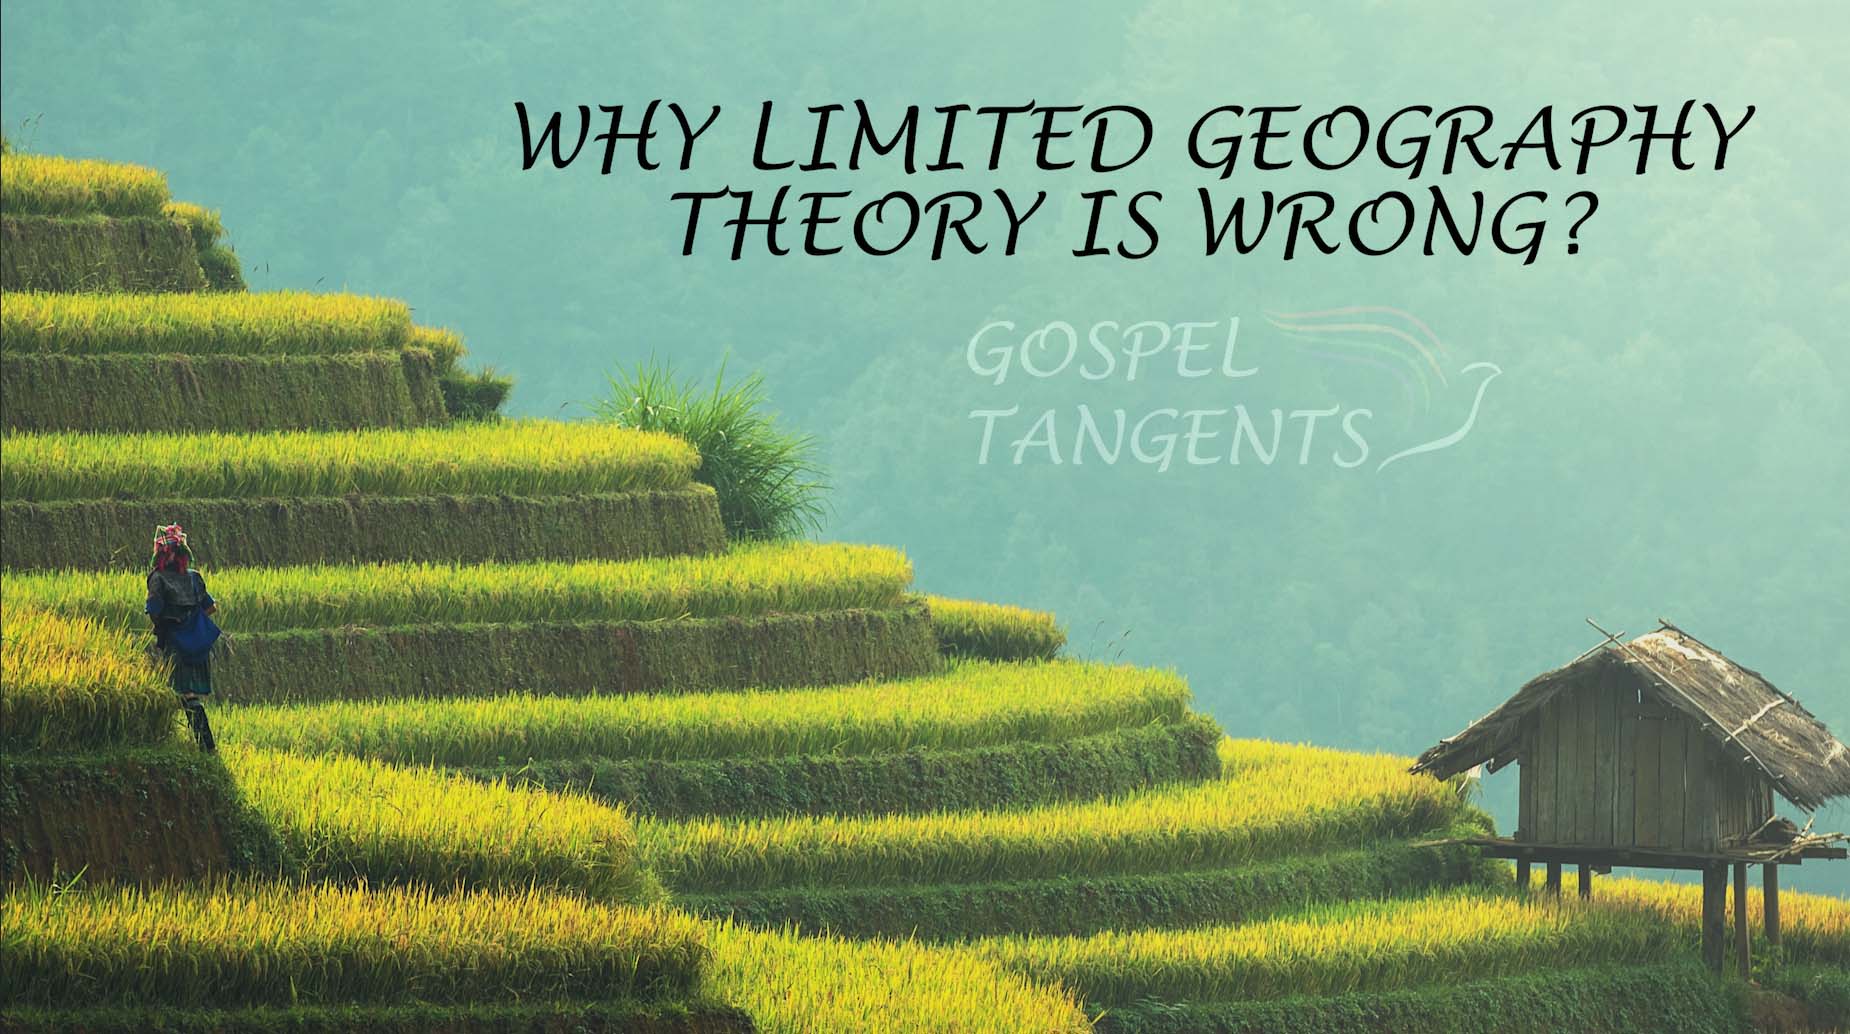 Limited Geography Theory - Why Limited Geography Theory is Wrong? (Part 5 of 11) - Mormon History Podcast